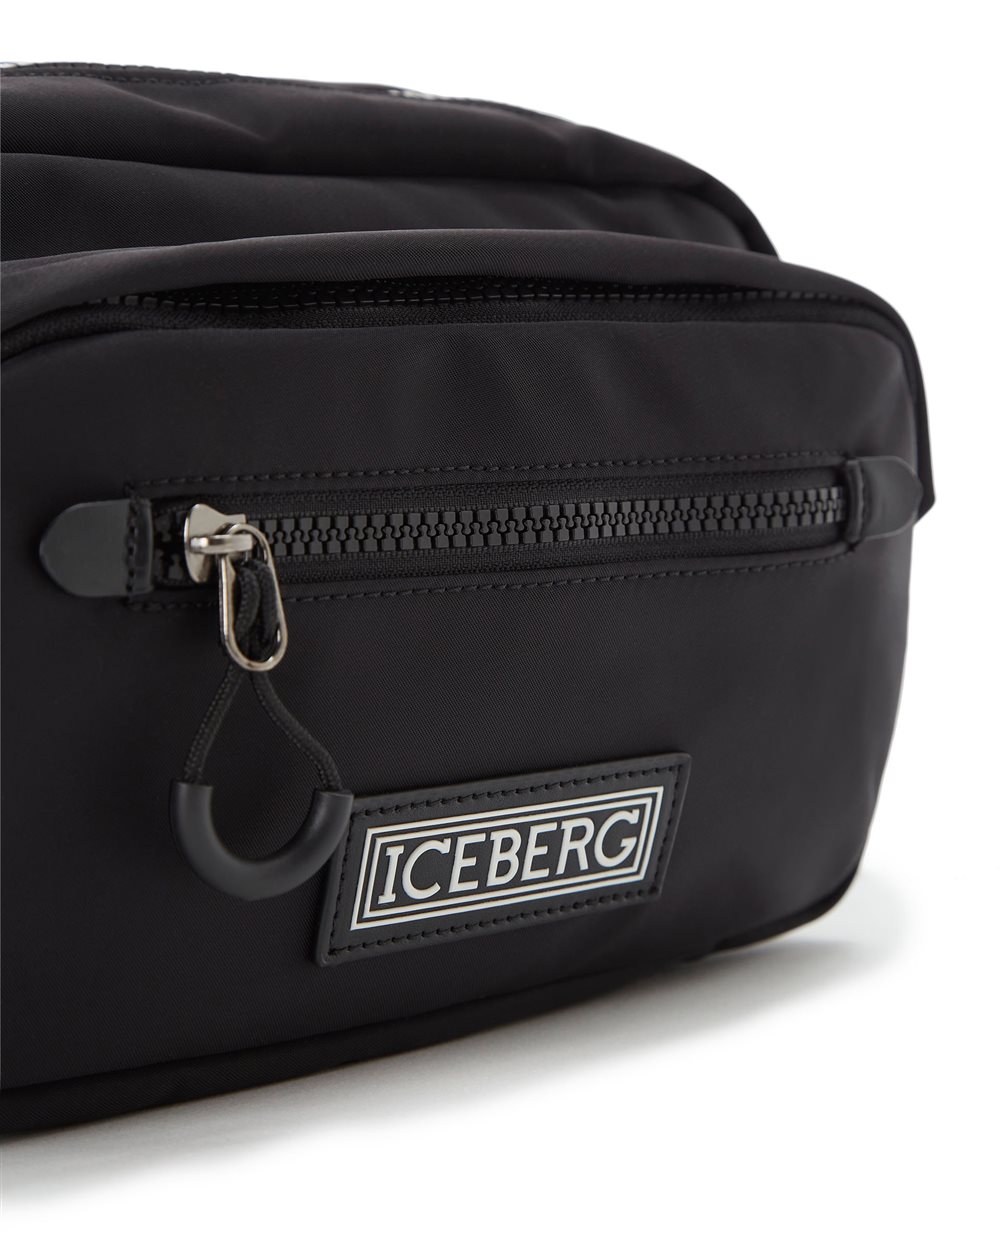 Clutch bag with logo - Iceberg - Official Website